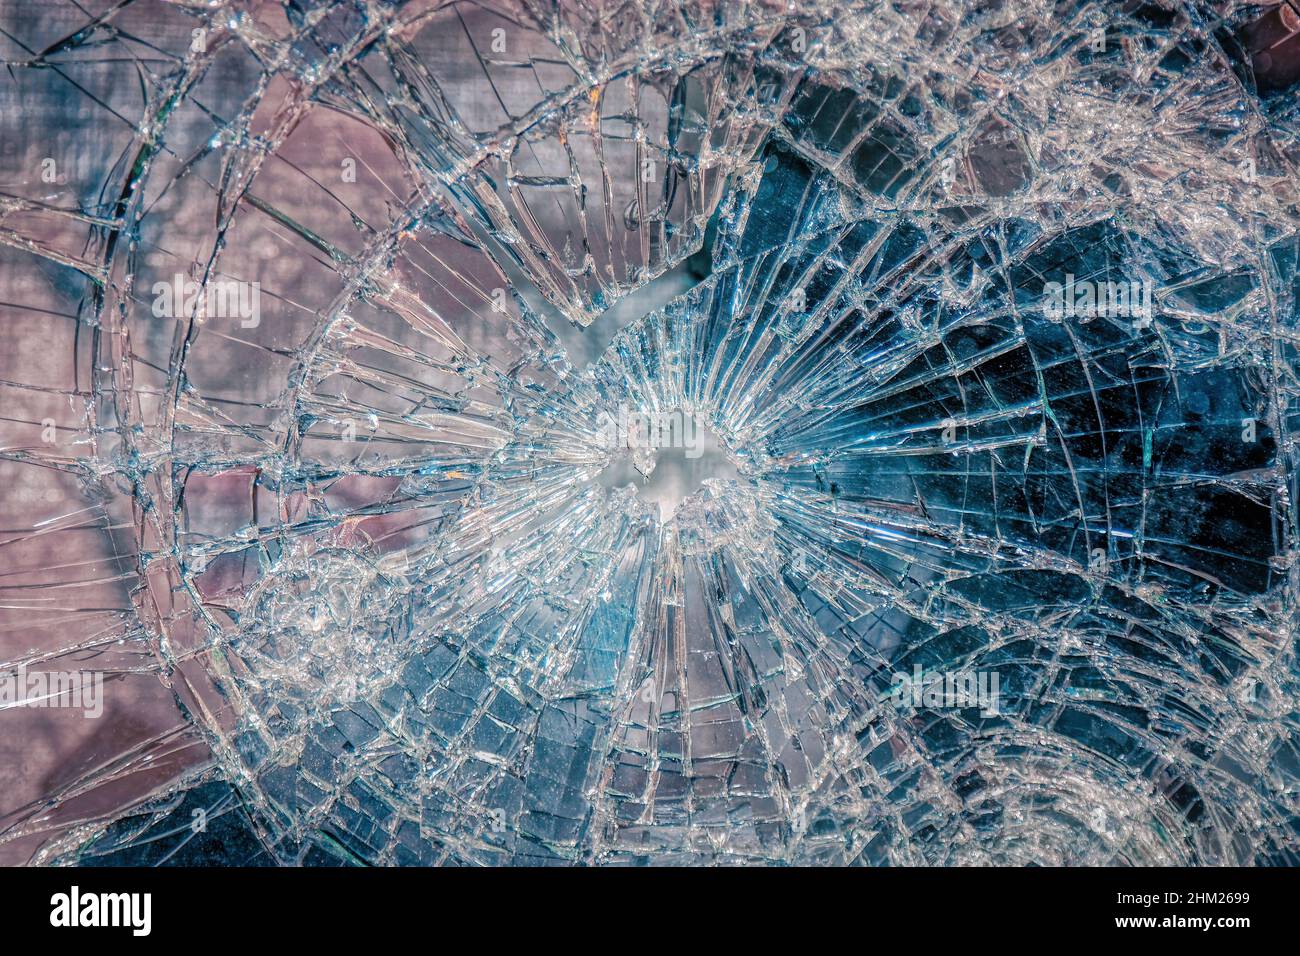 Broken or shattered cracked glass window as a background Stock Photo